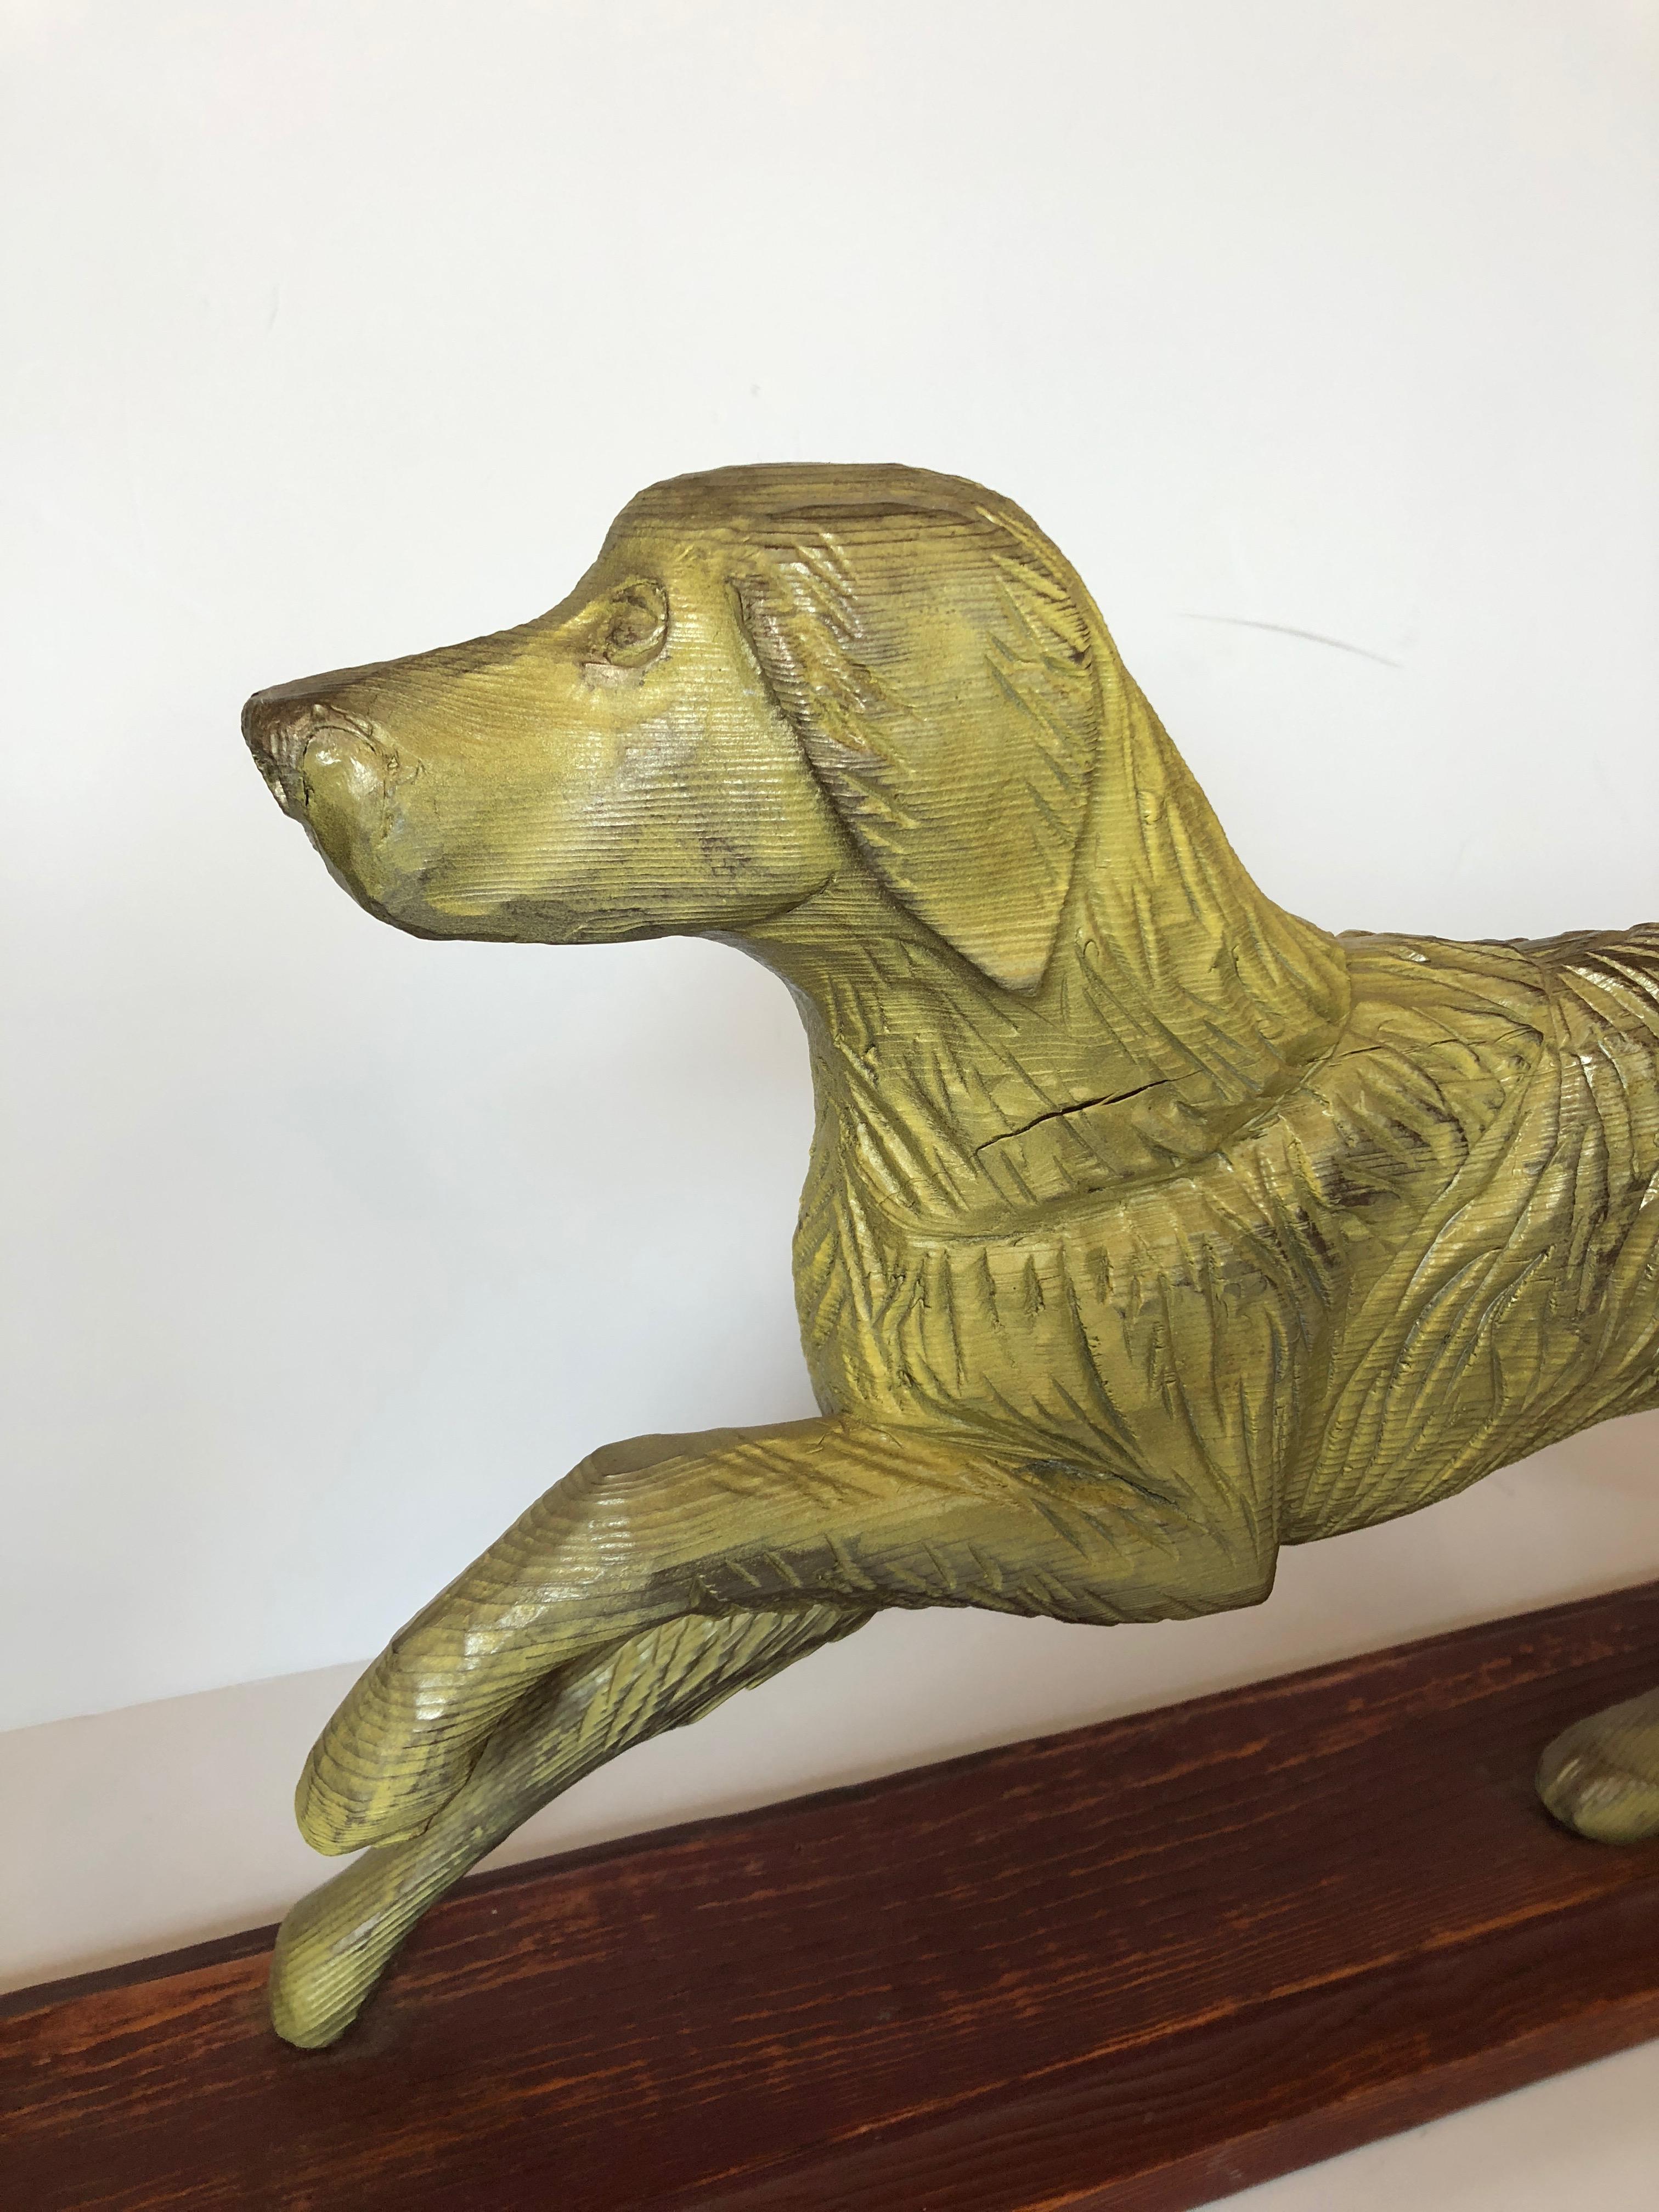 Mid-20th Century Rustic Vintage Sculpture of a Prancing Retriever Dog